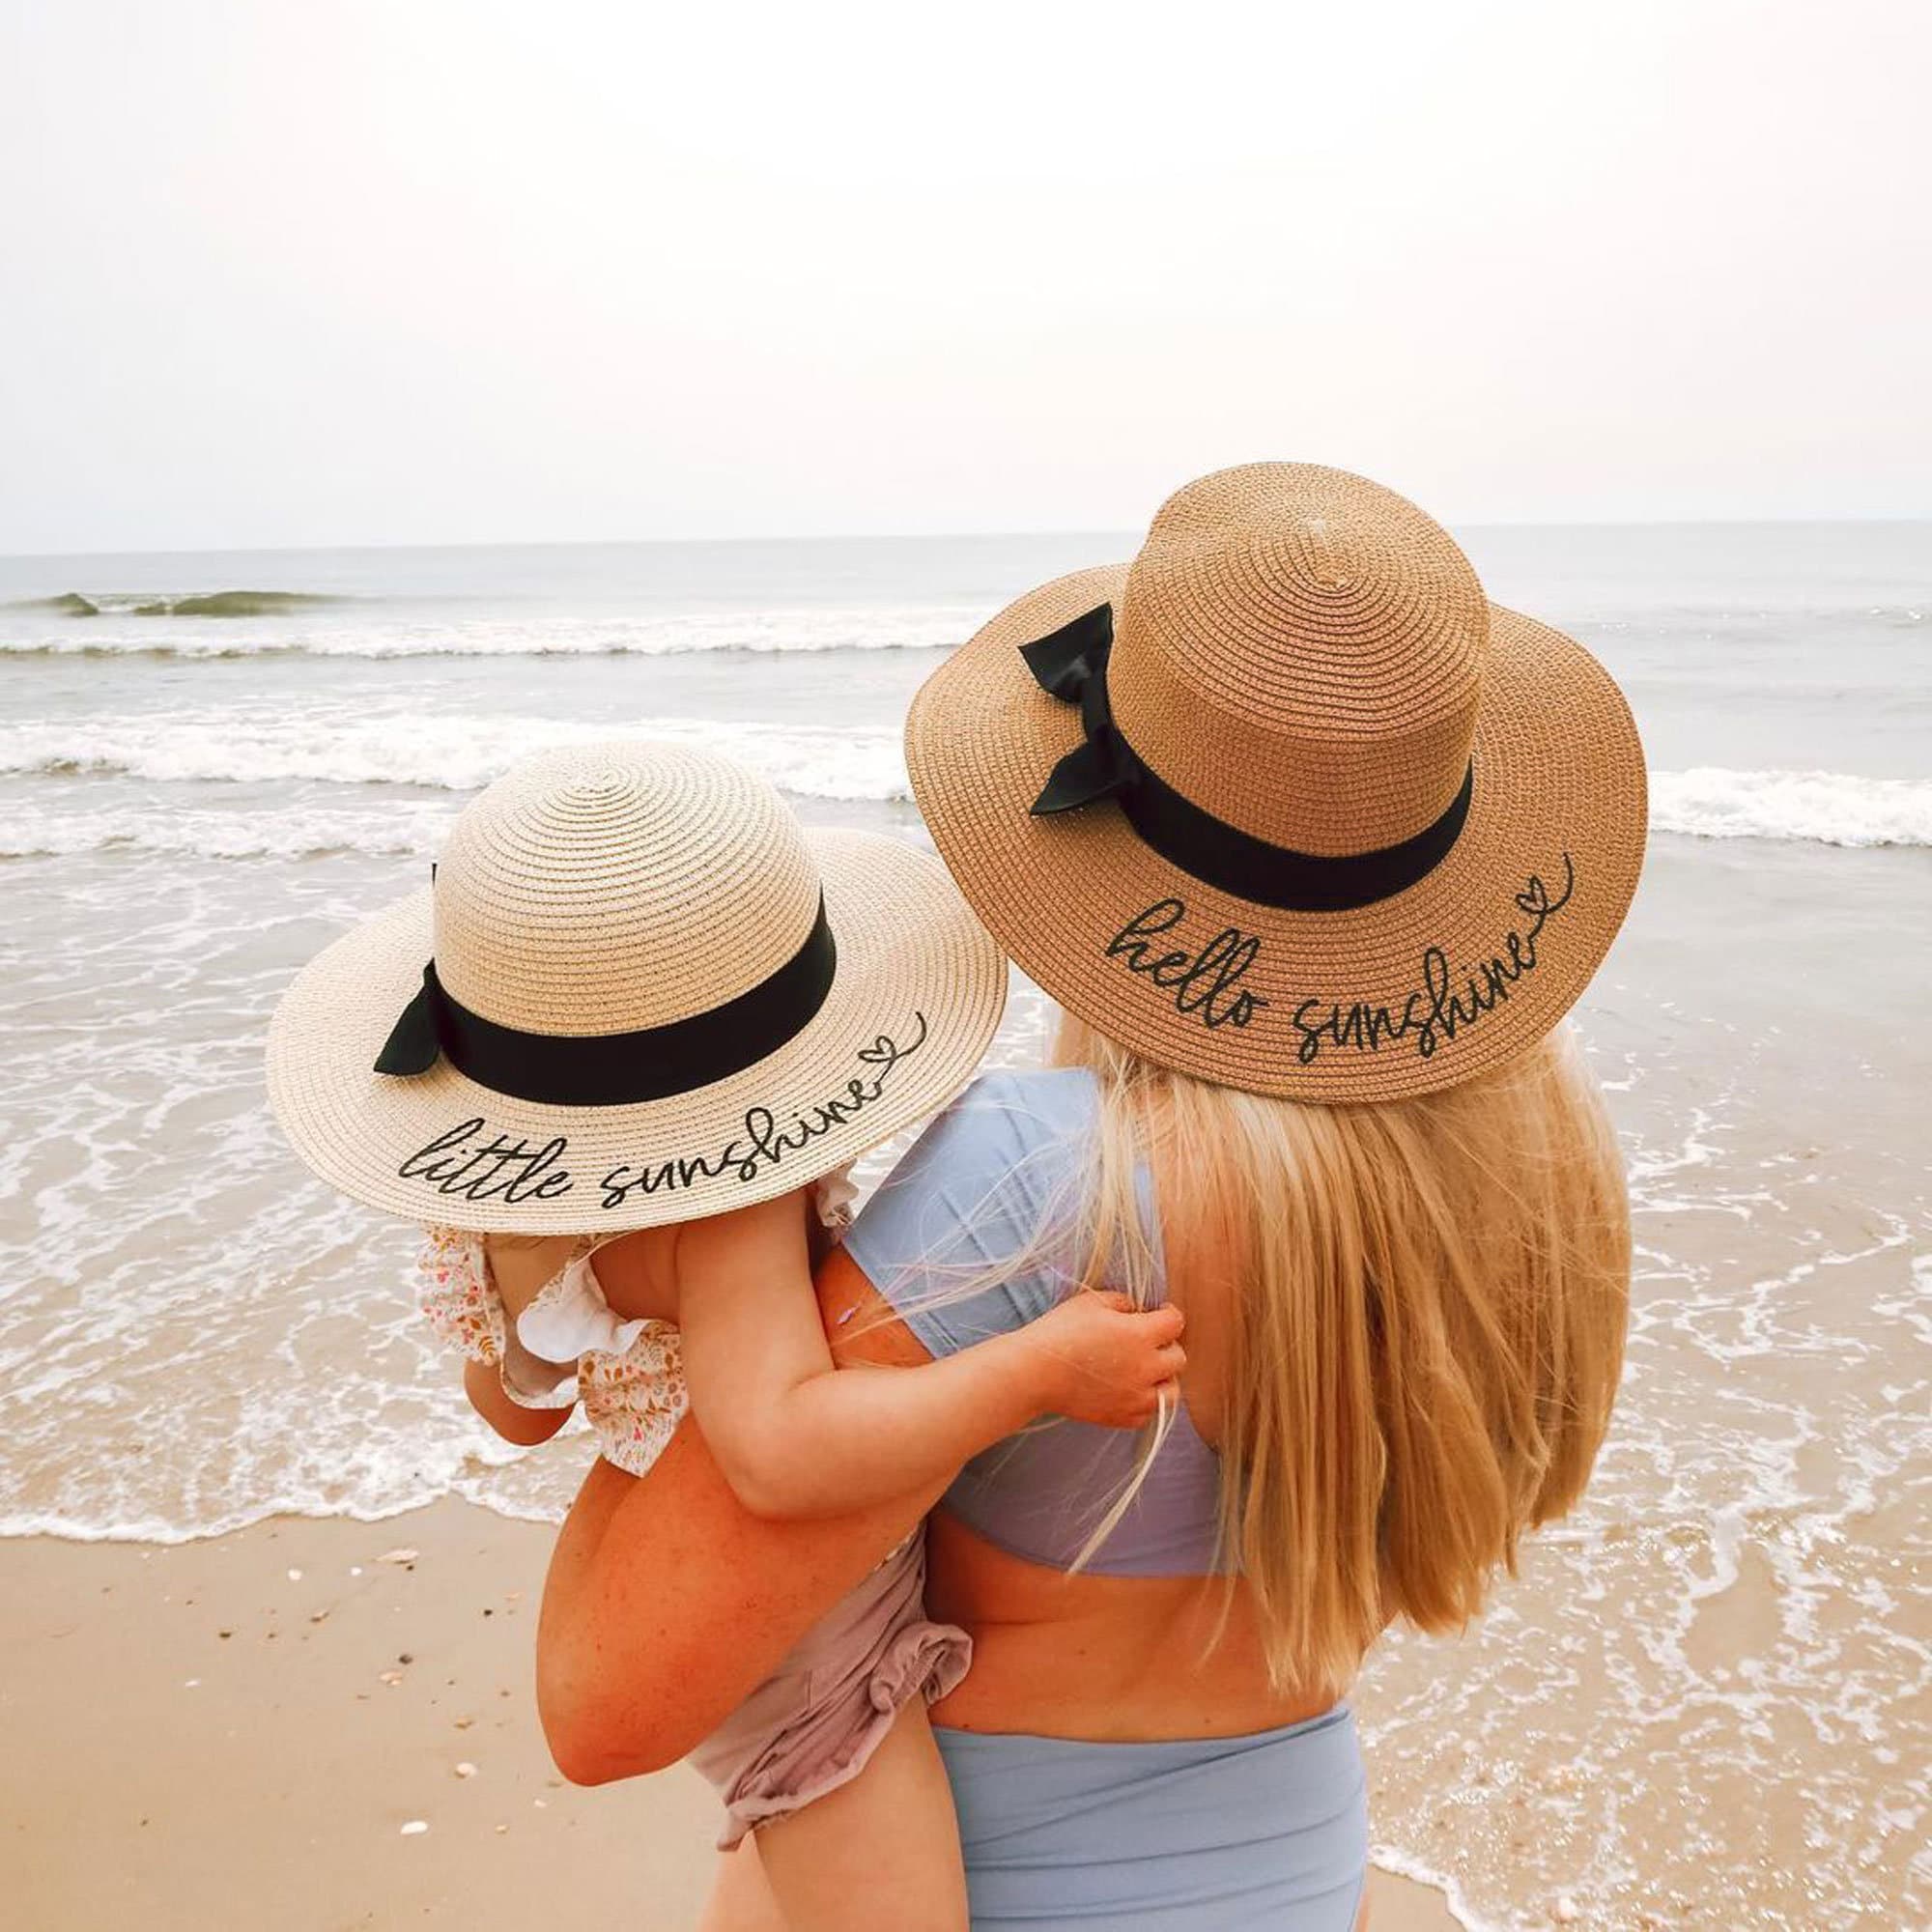 Girl Hats Nautical Straw Hats Panama Hats Custom Straw Hats Mommy & Me Matching Hats Beach Hats Matching Earrings and Bracelet for Mom